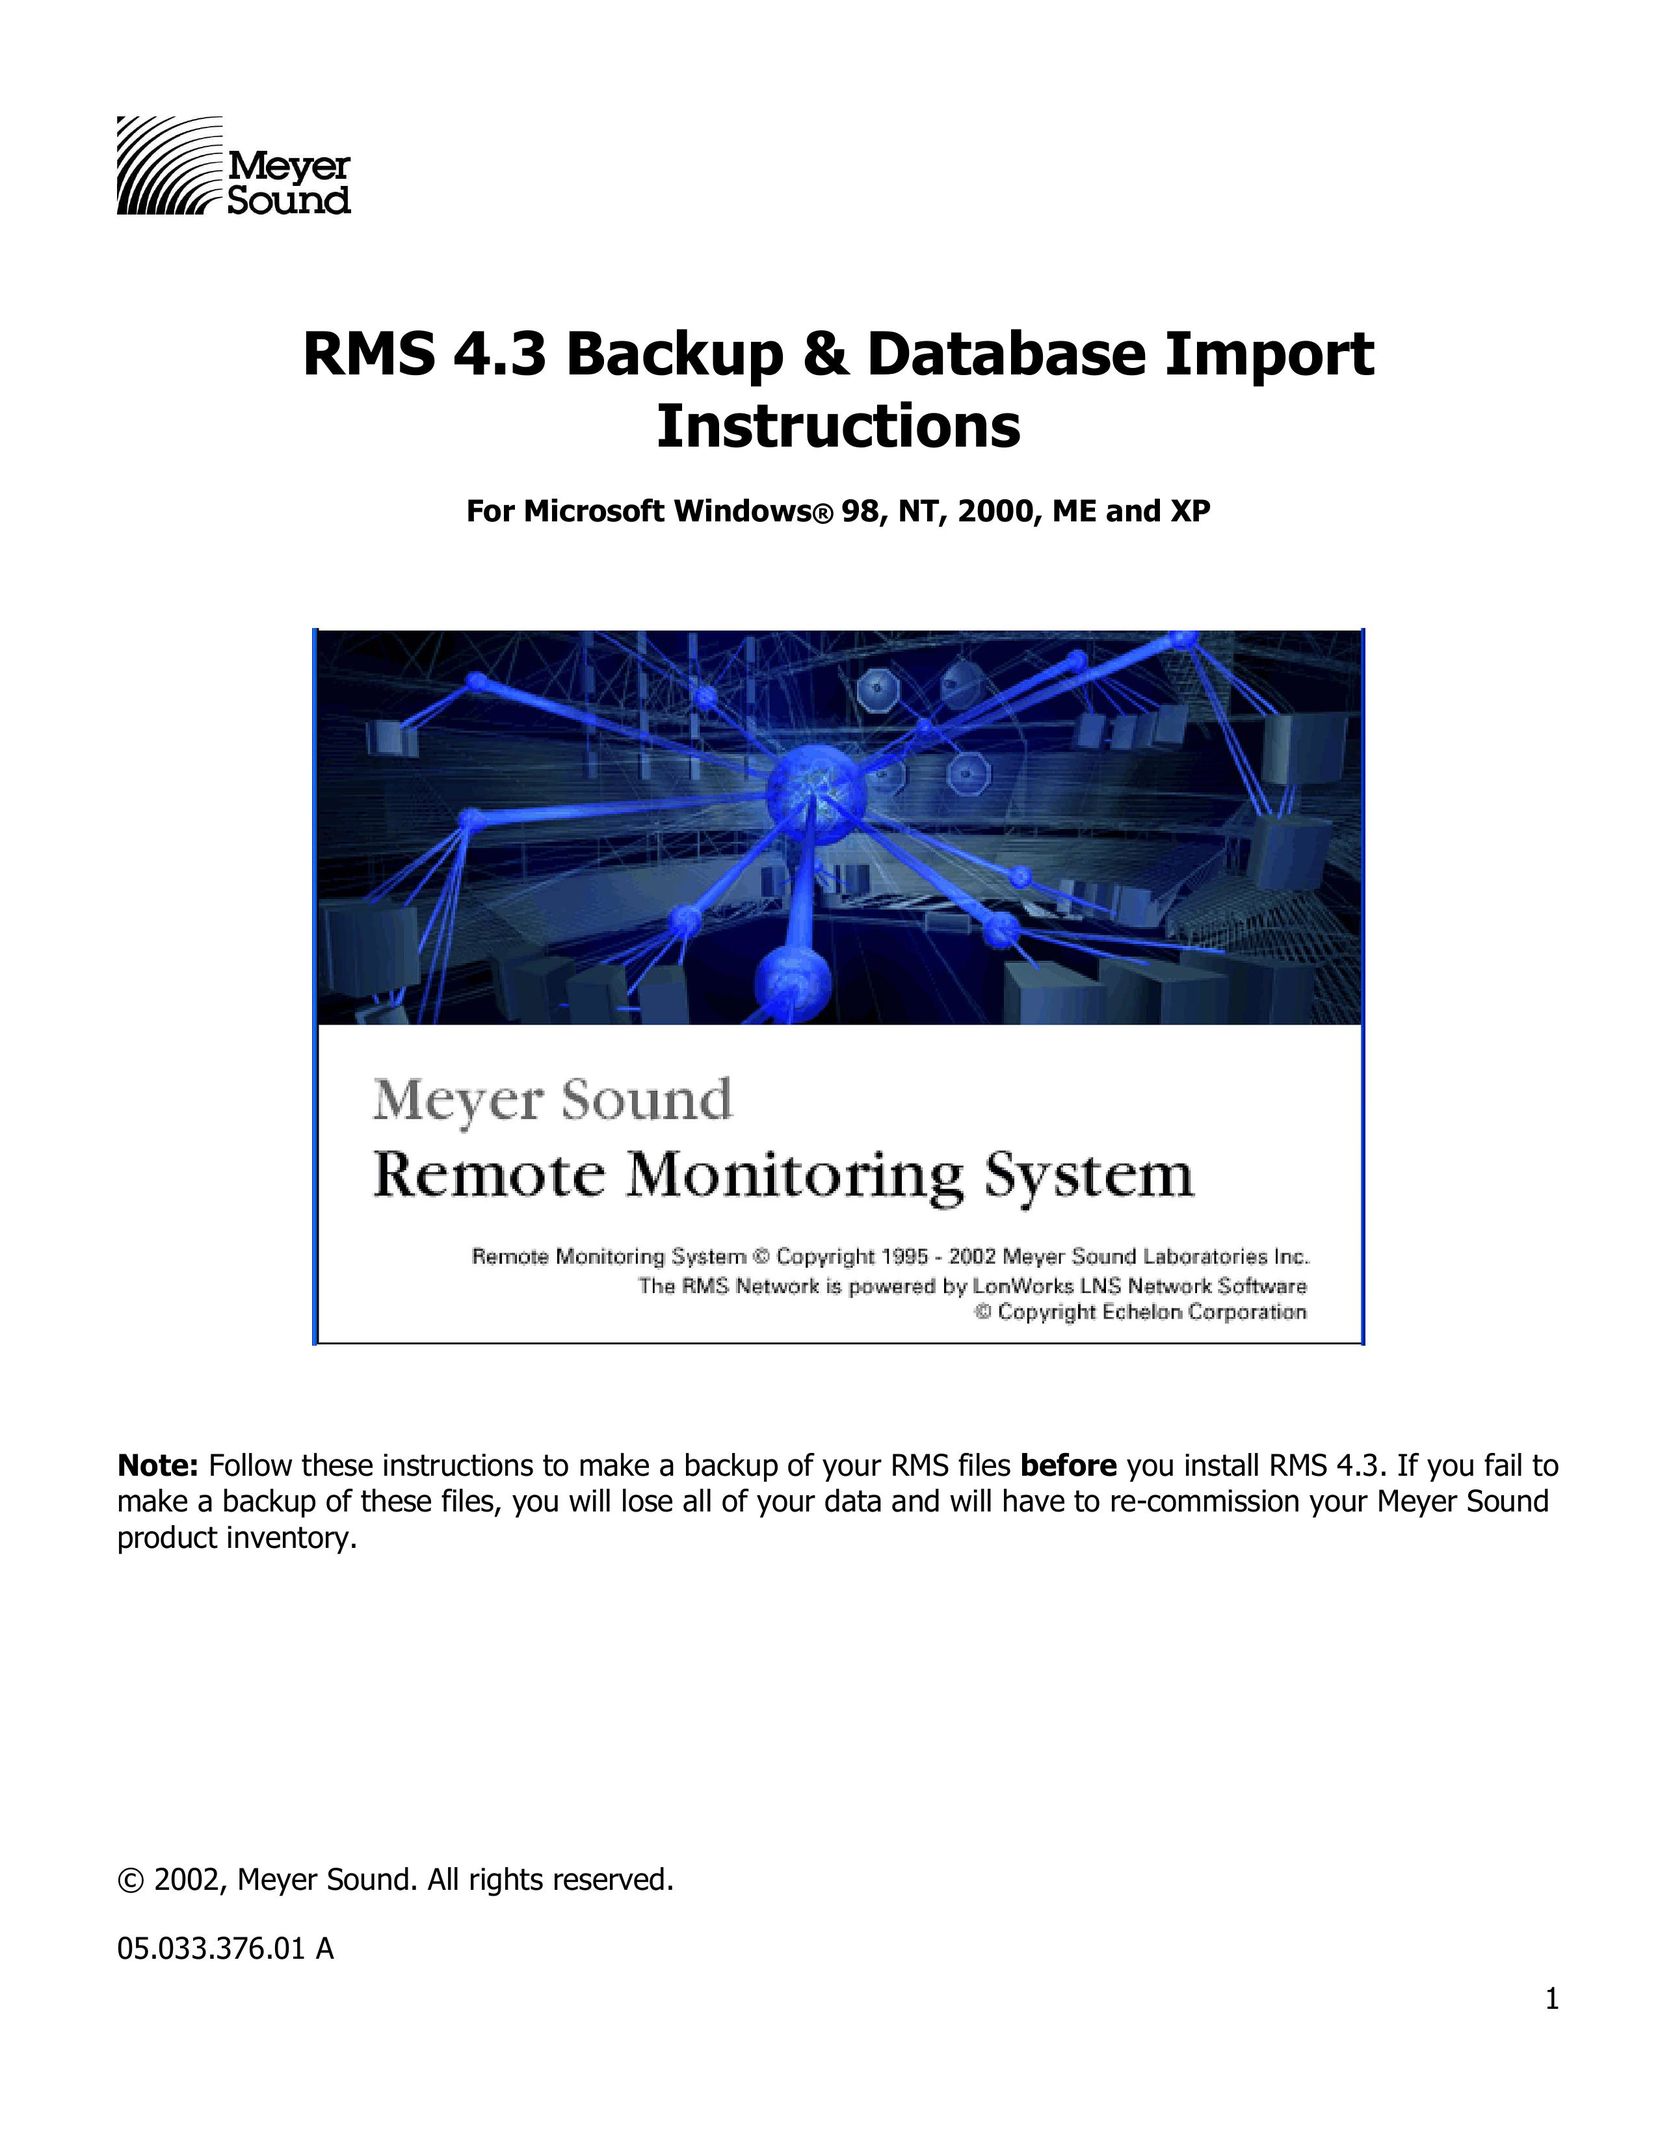 Meyer Sound RMS 4.3 Computer Drive User Manual